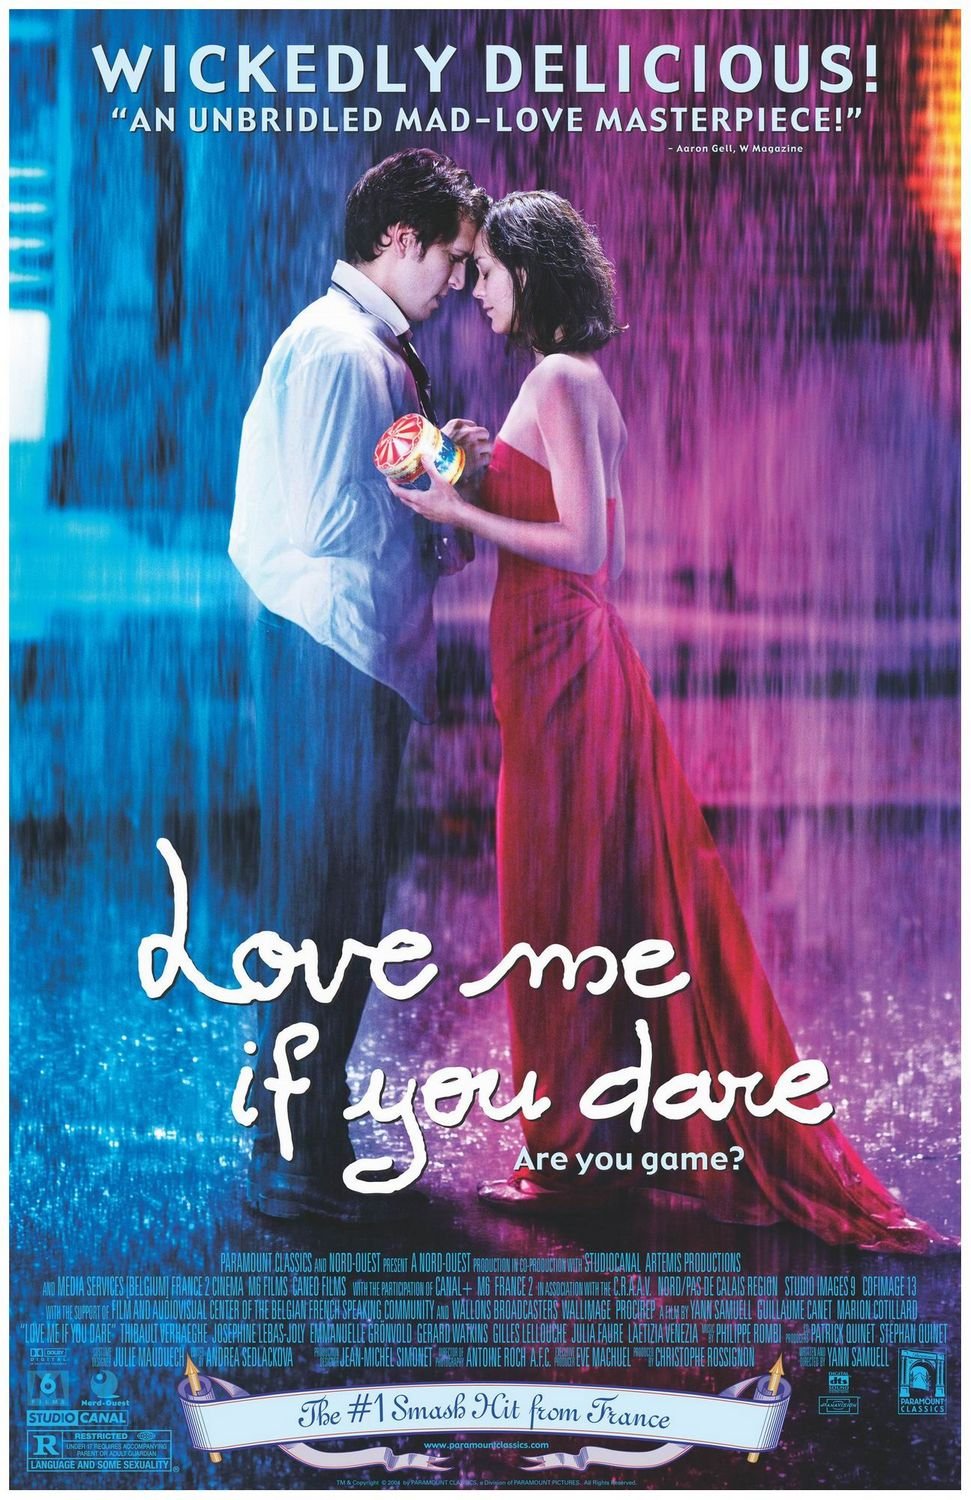 Poster of the movie Love me if you dare